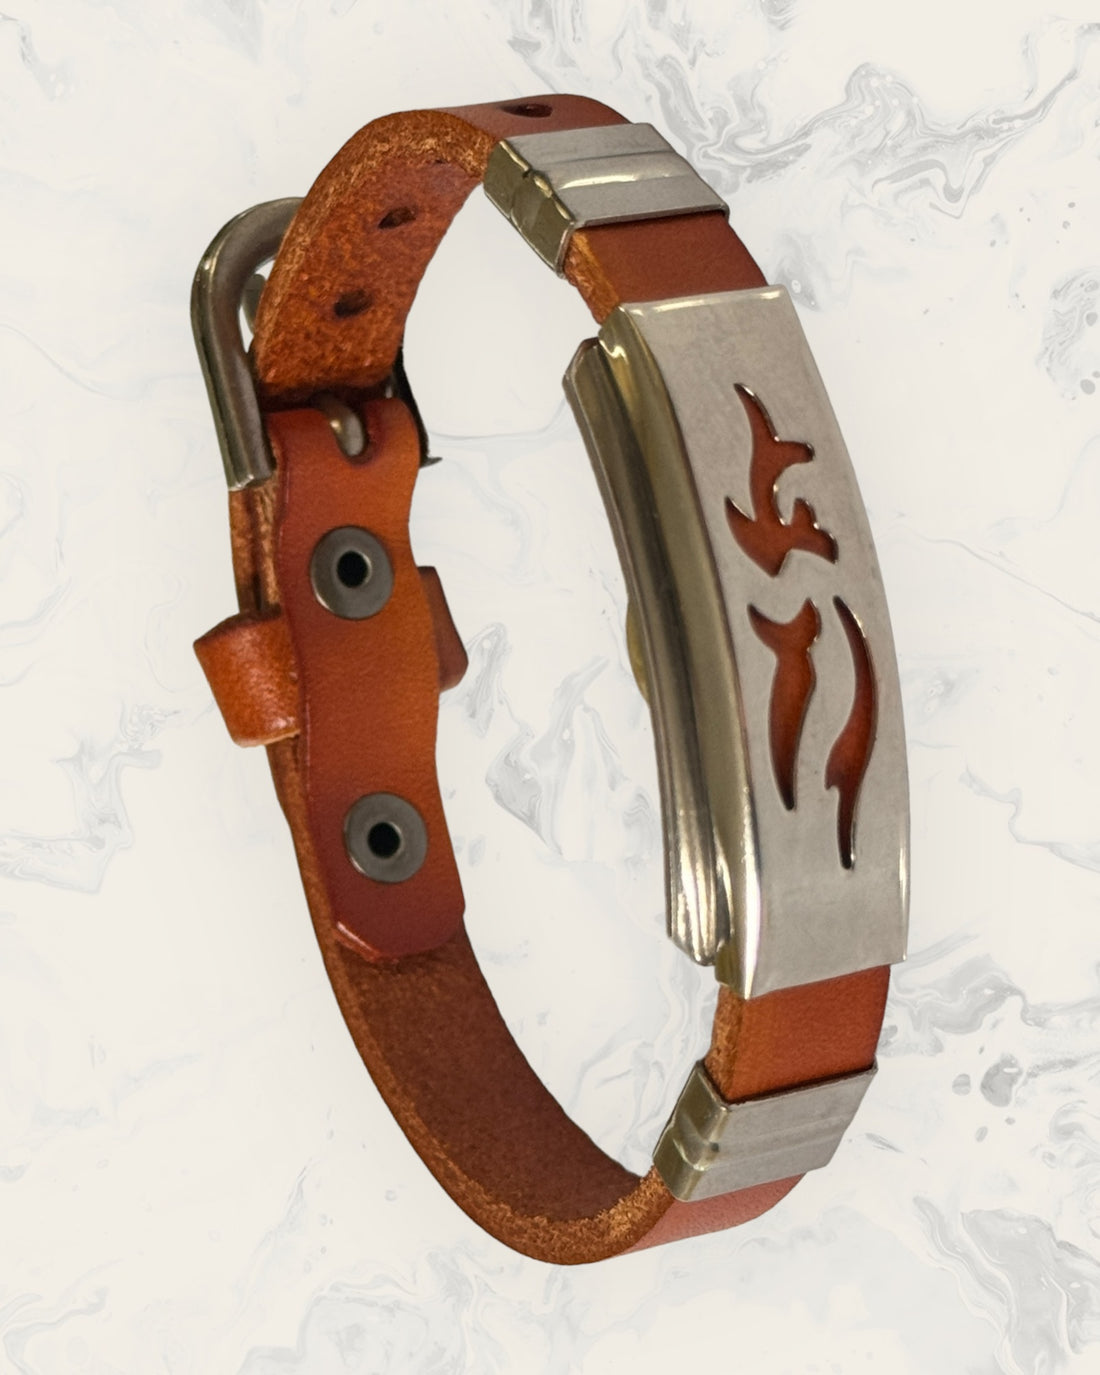 Natural Pain Relief and EMF Protection Bracelet Leather Band Color Burnt Orange with Dolphin design on a silver metal slider